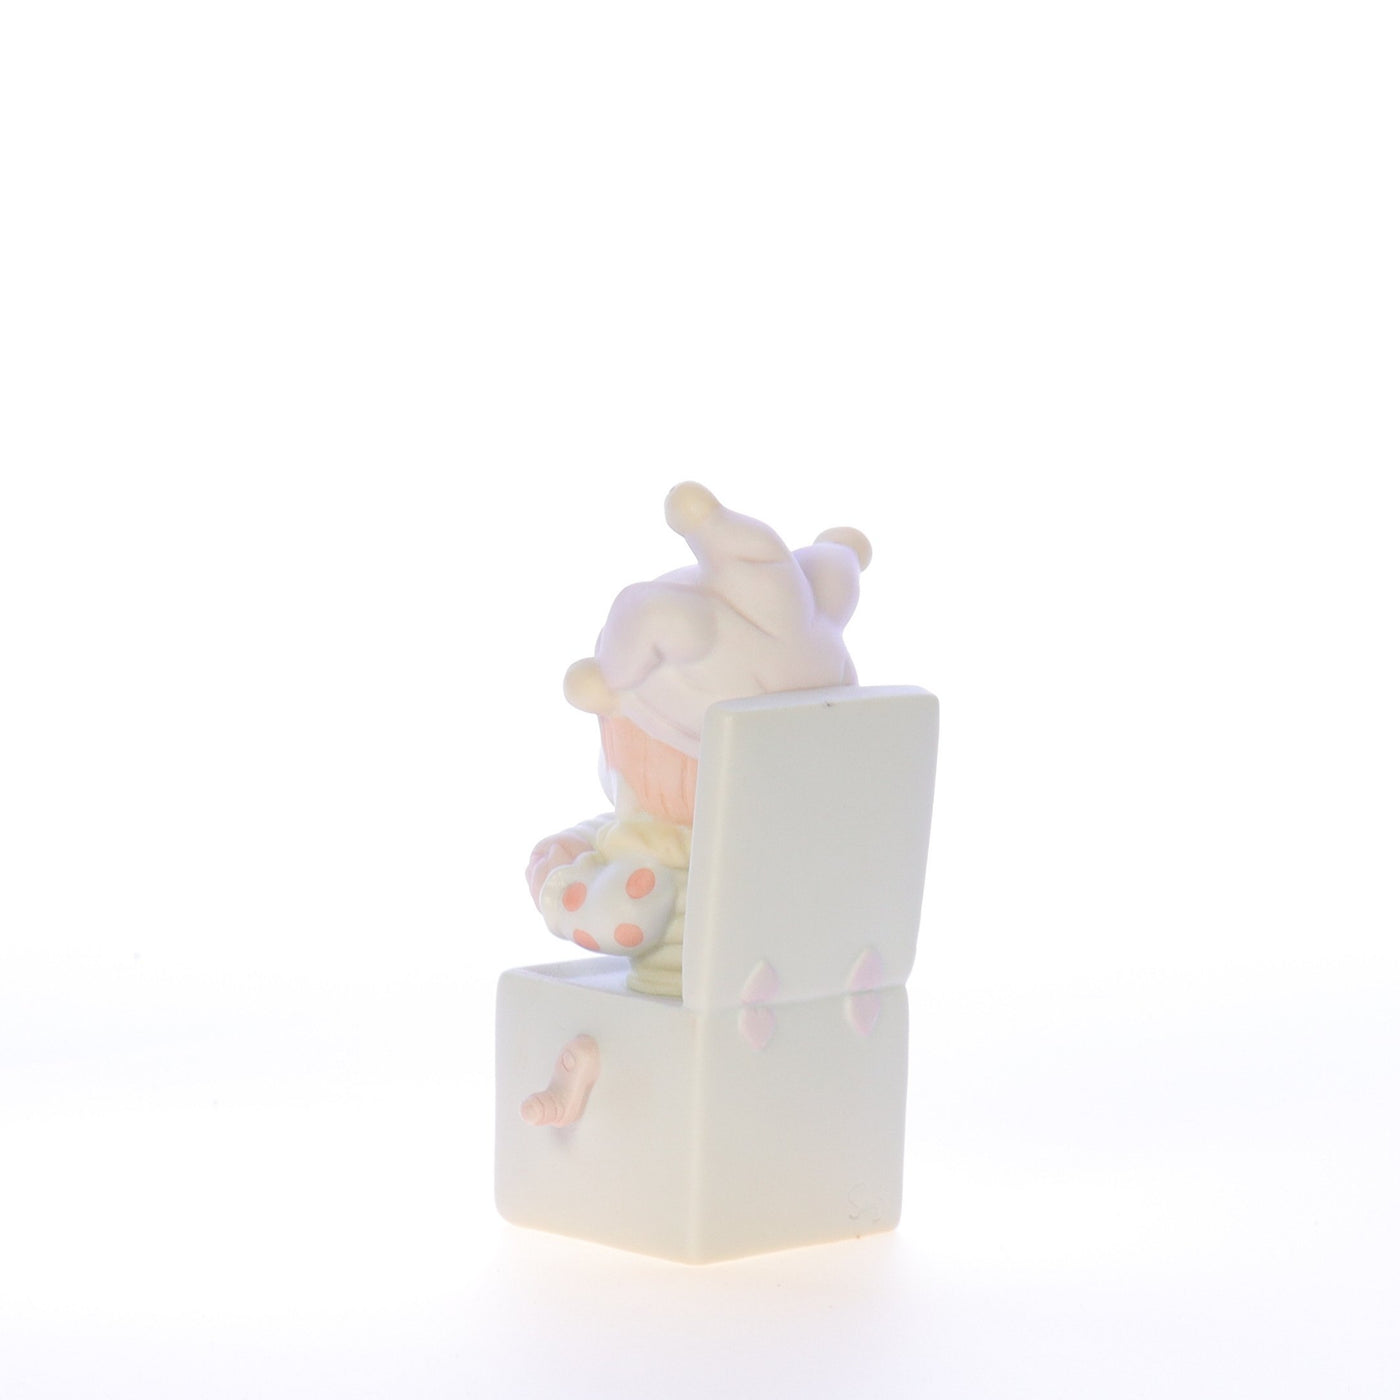 Precious_Moments_Porcelain_Figurine_Just_To_Let_You_Know_Youre_Tops_B0006_04